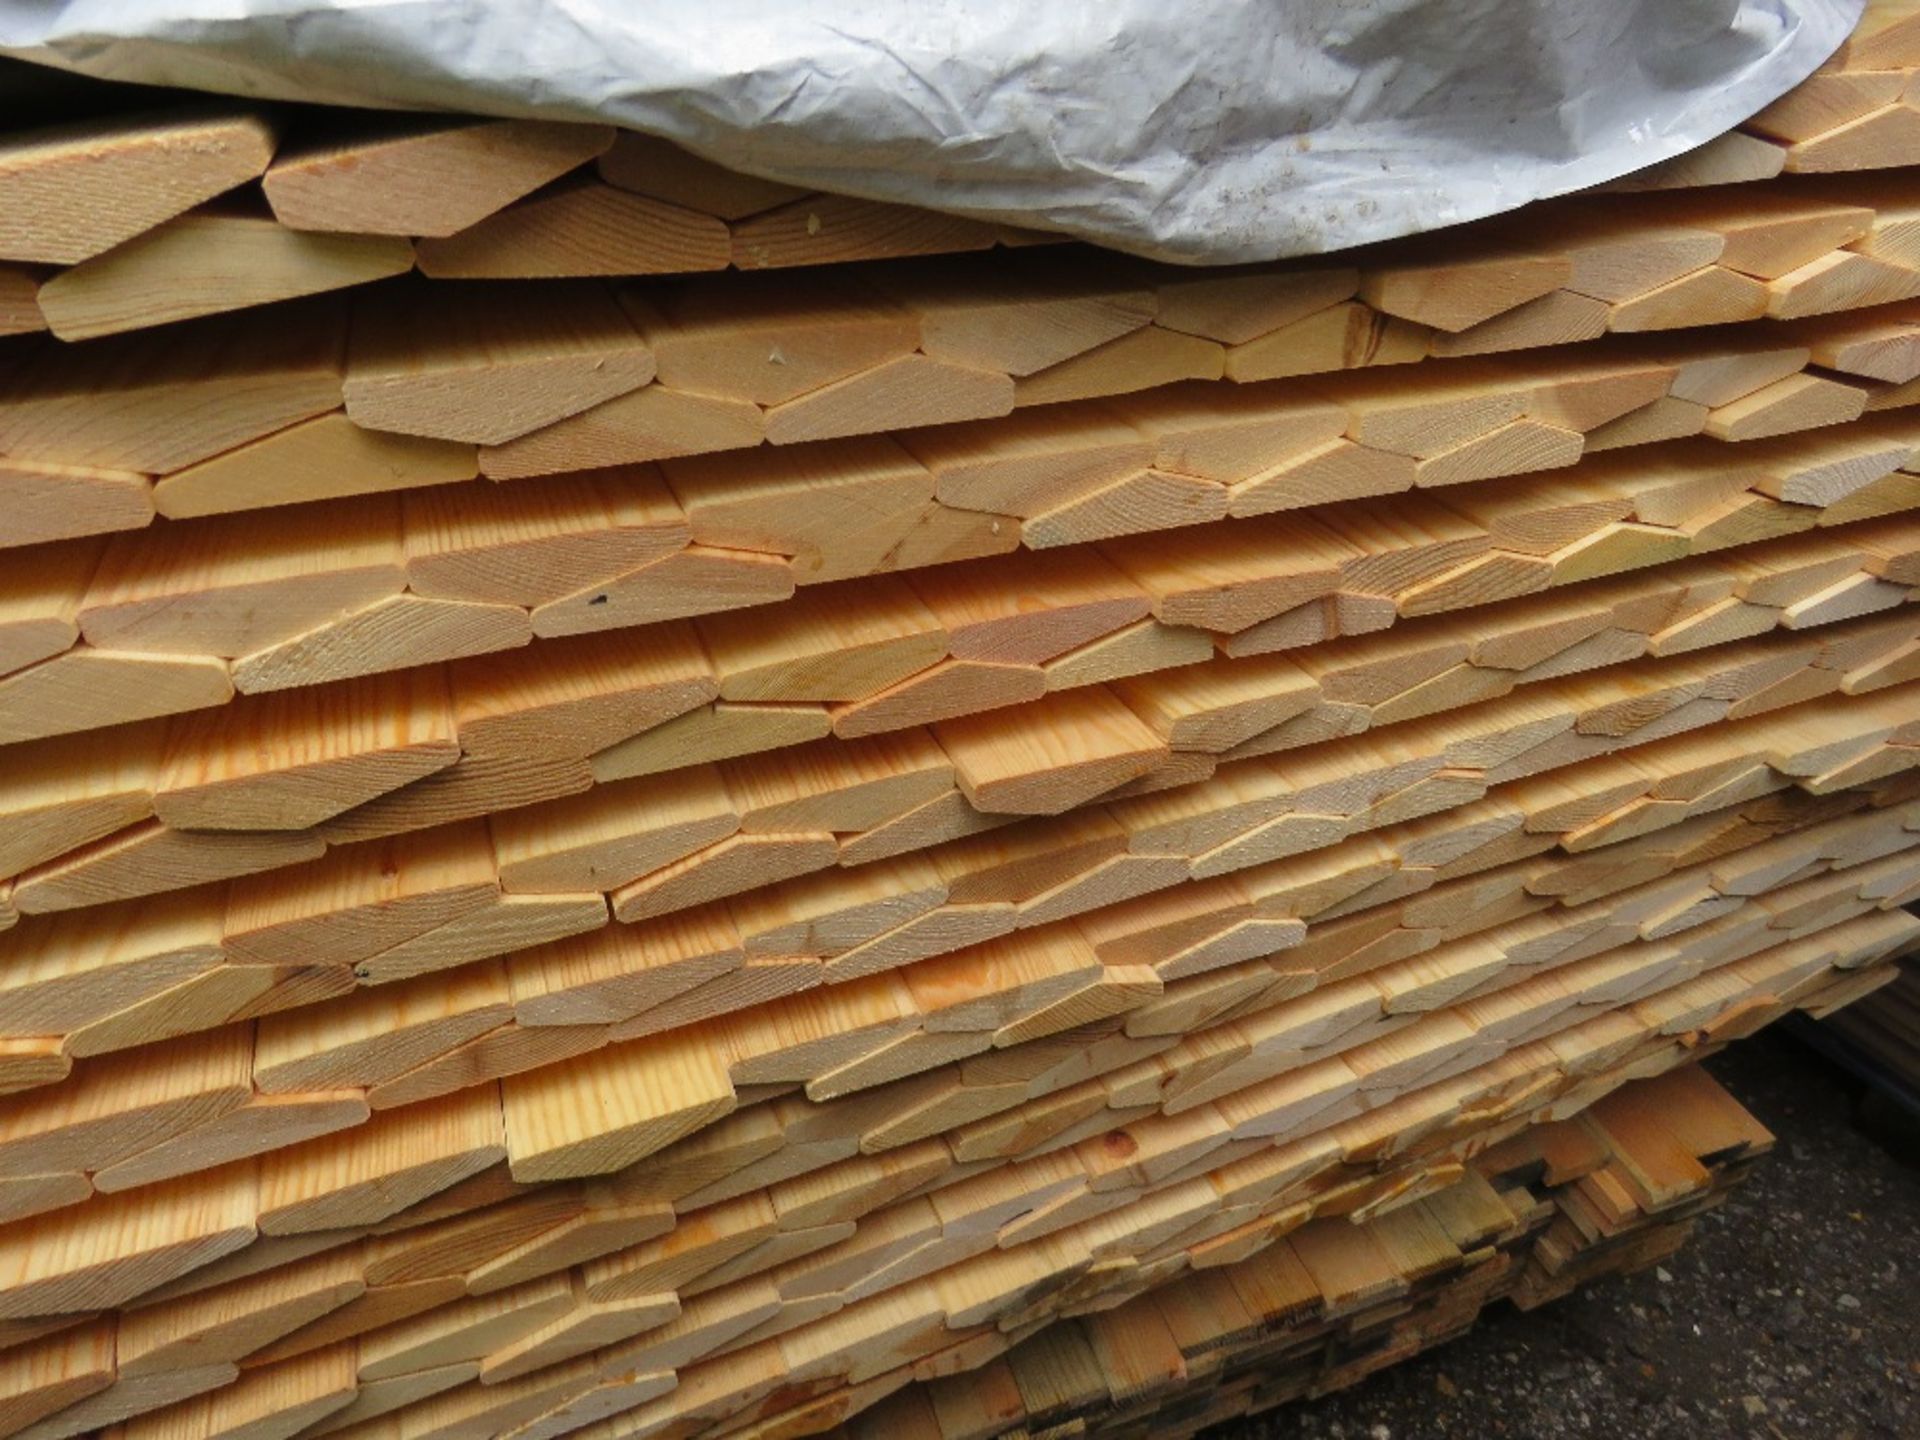 STACK CONTAINING 3 X PACKS OF ASSORTED UNTREATED VENETIAN SLATS, BOARDS AND RIDGE CAPS. 1.73-1.8M LE - Image 5 of 5